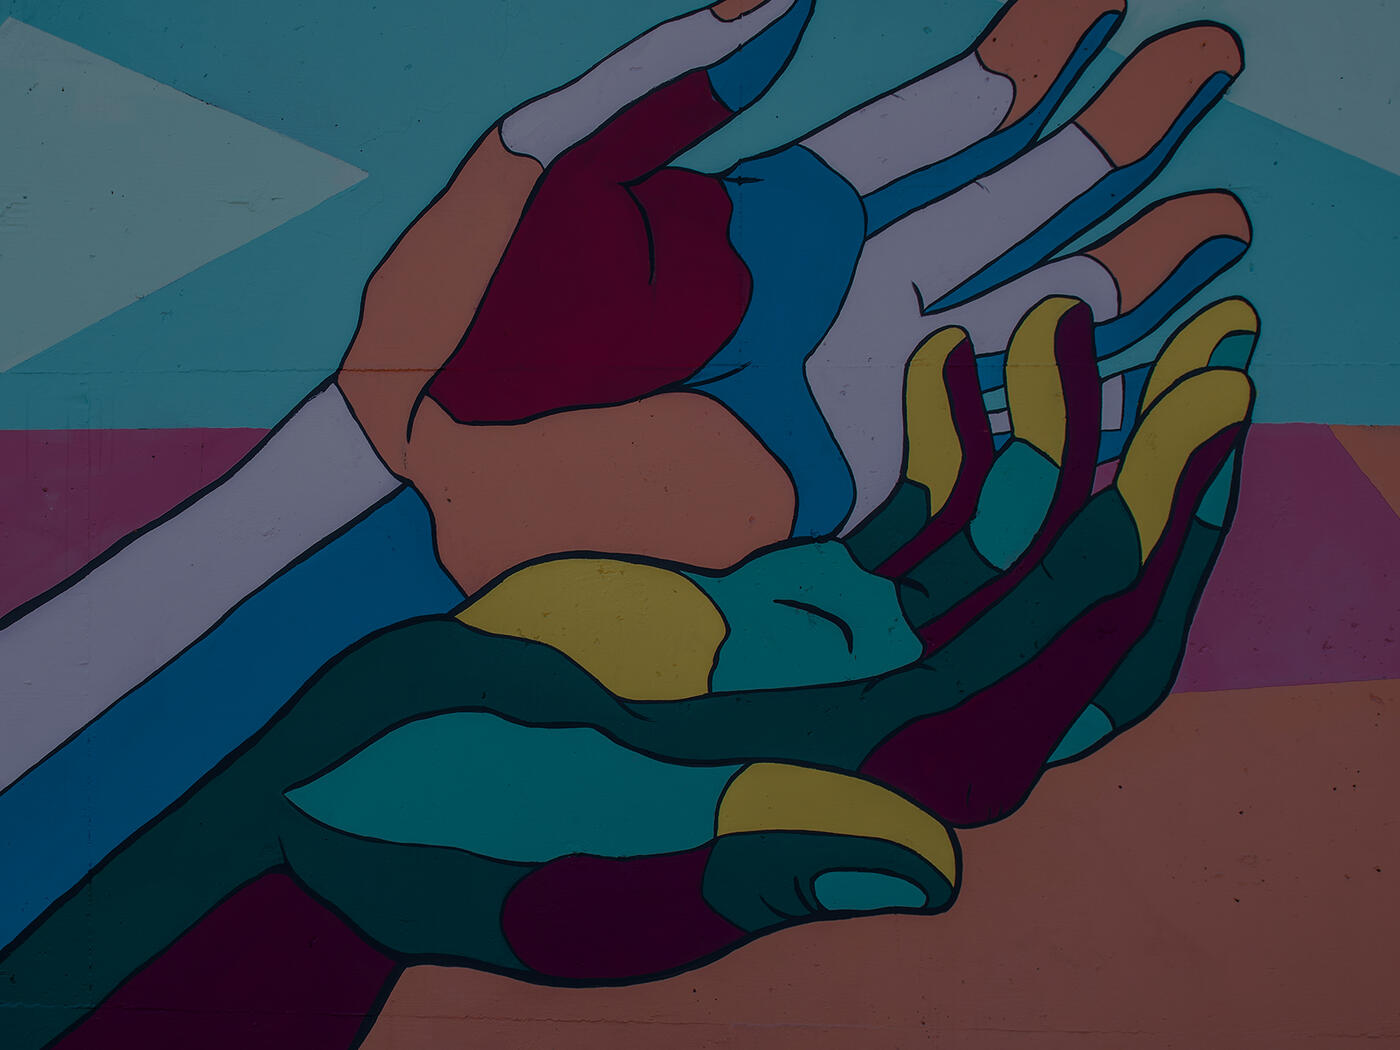 A mural of hands in various colorful colors